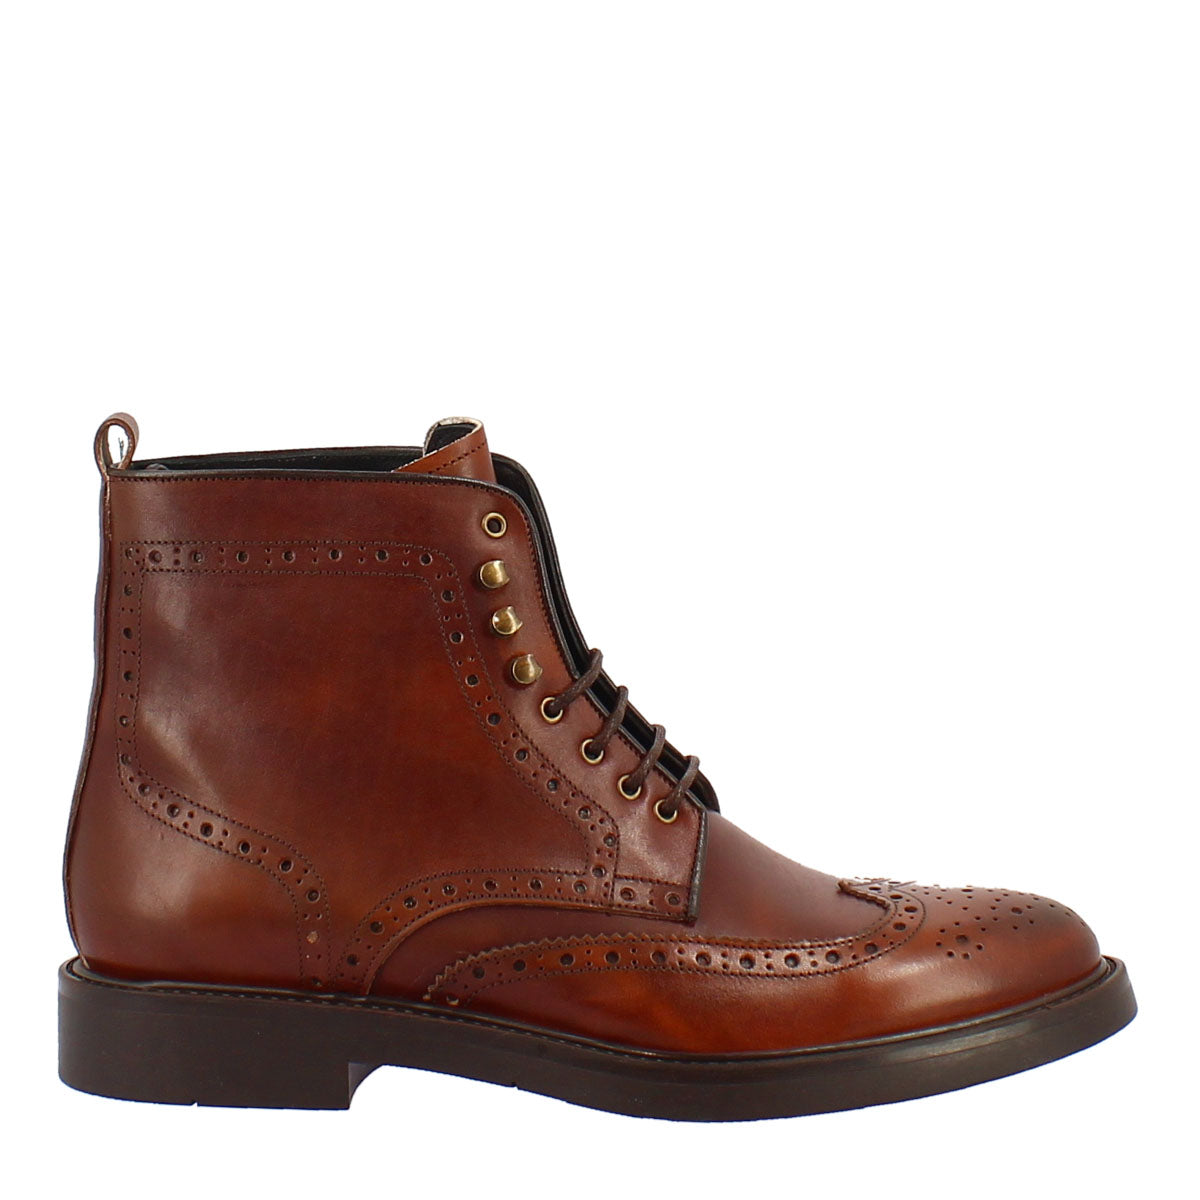 Men's brogue derby ankle boot in brown leather with rubber sole